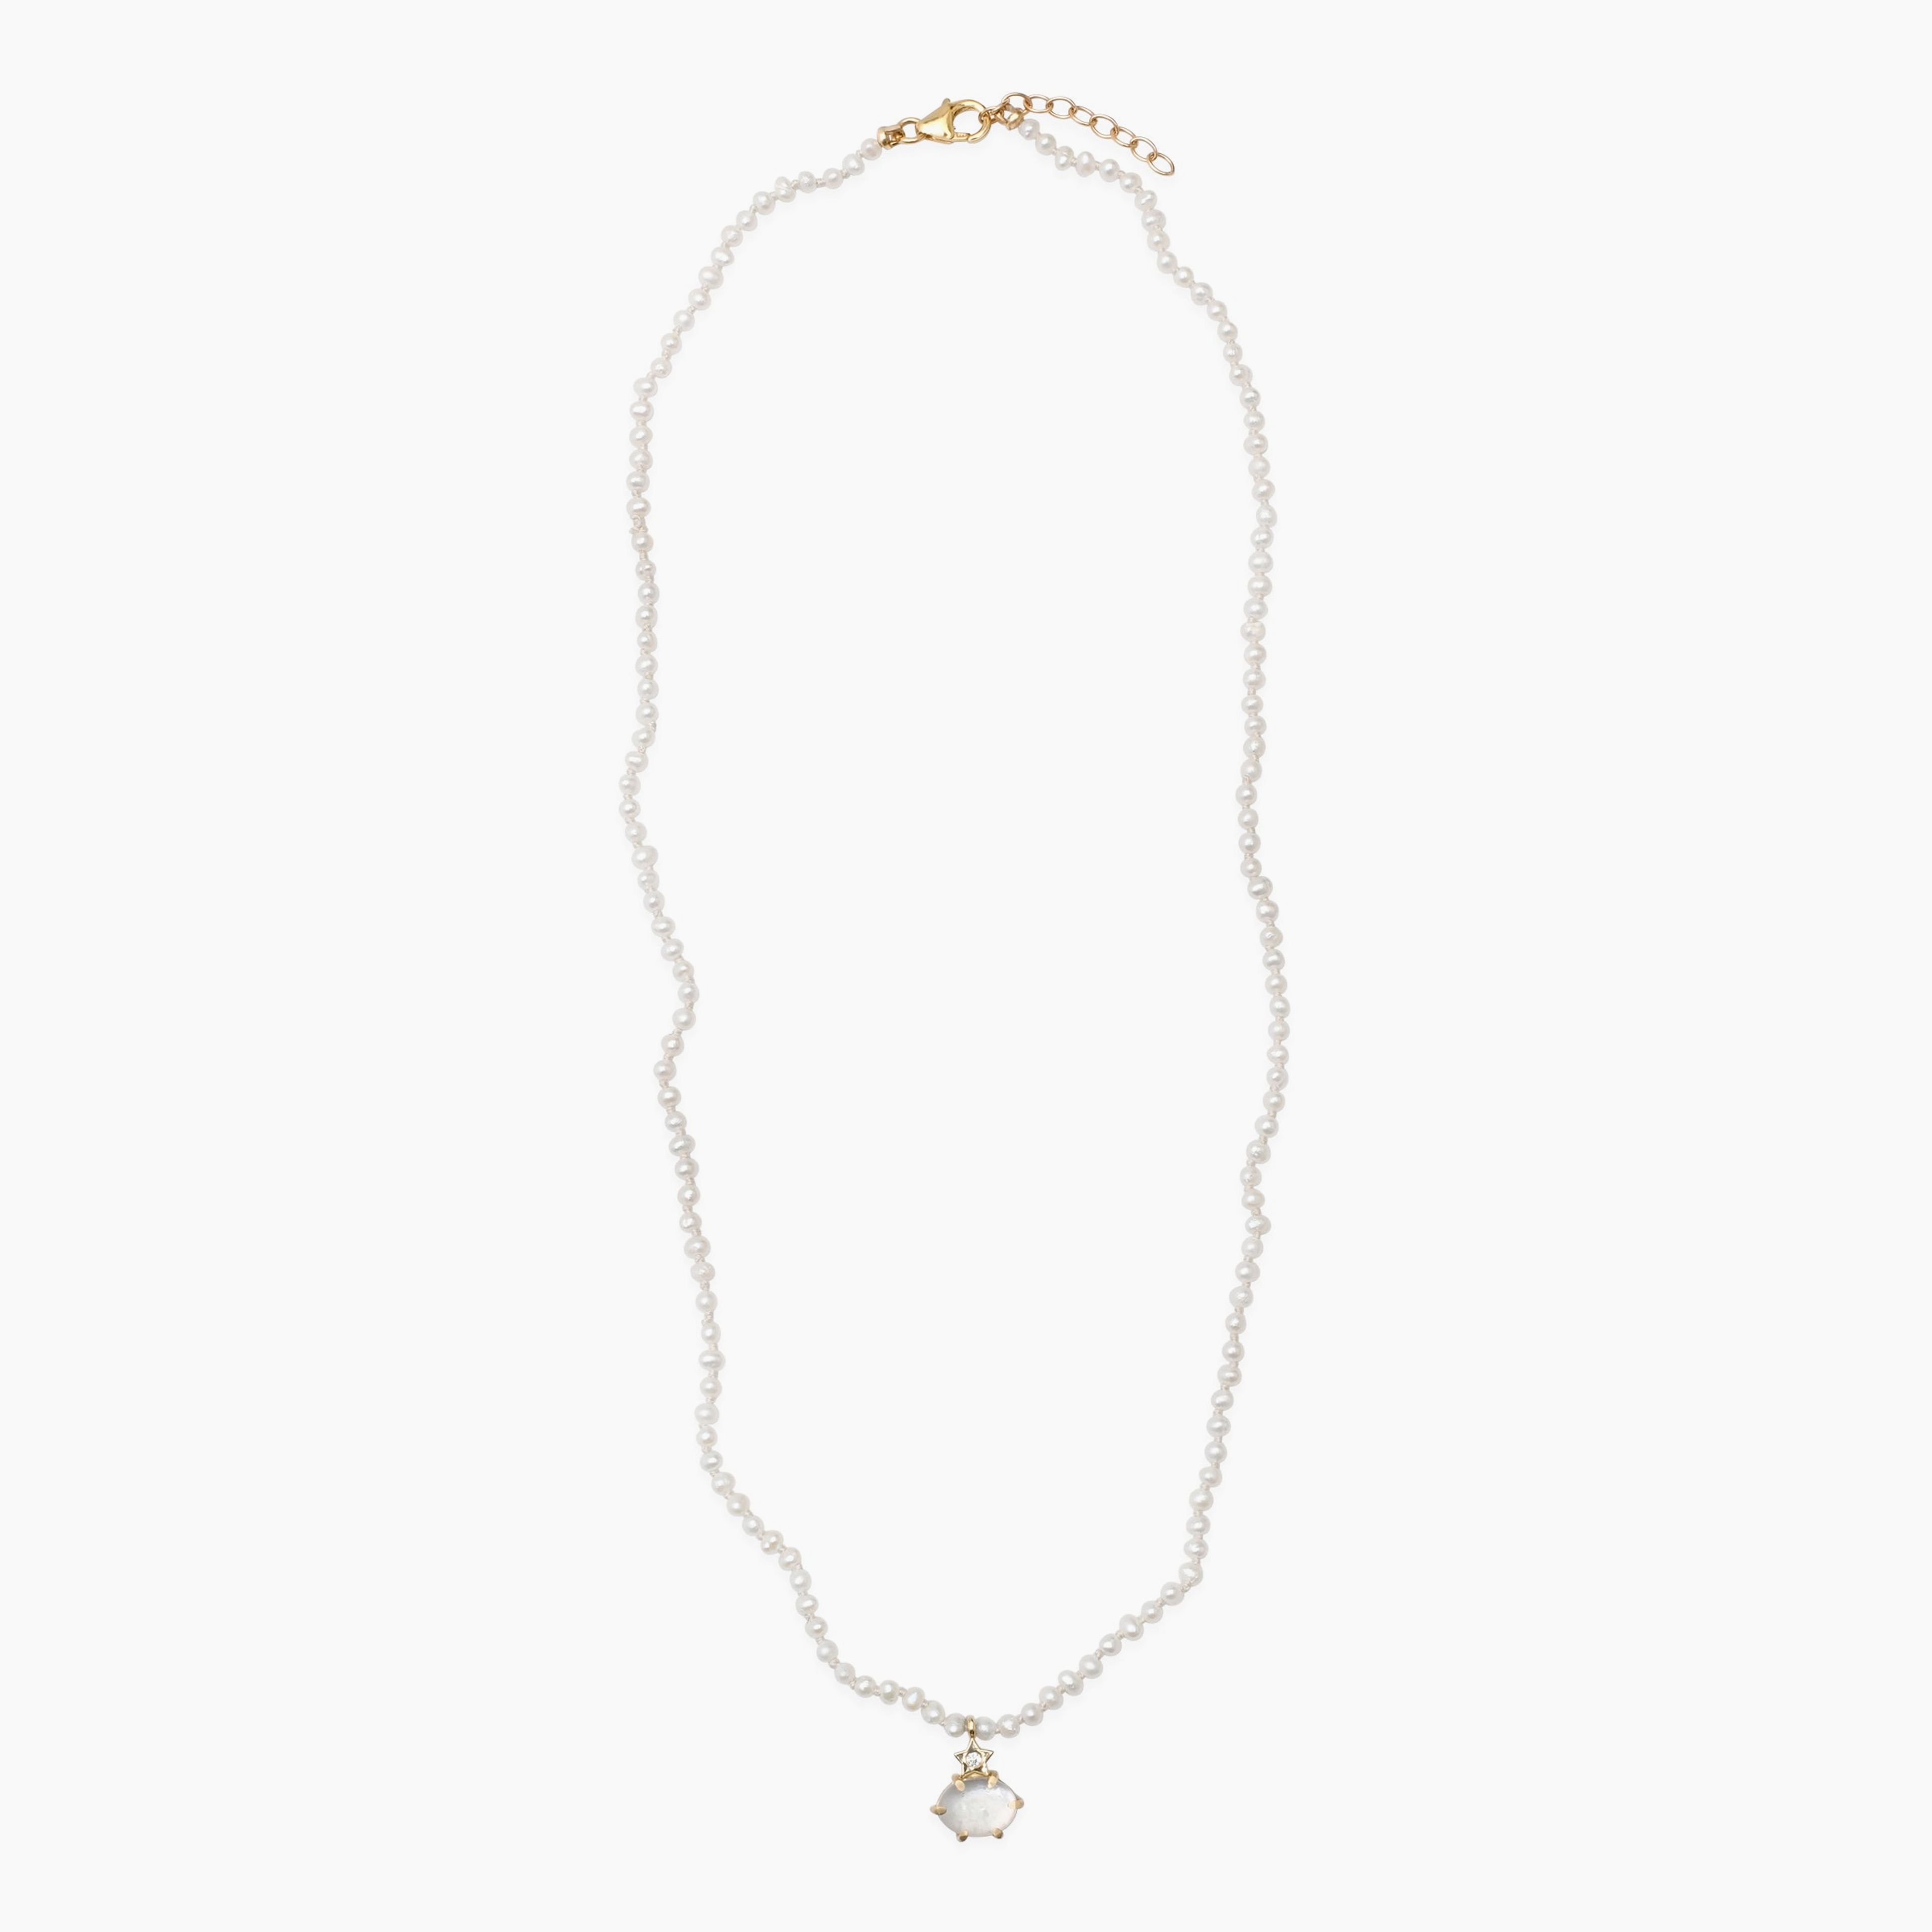 Mini Cosmo Pearl Beaded Necklace with Moonstone Charm